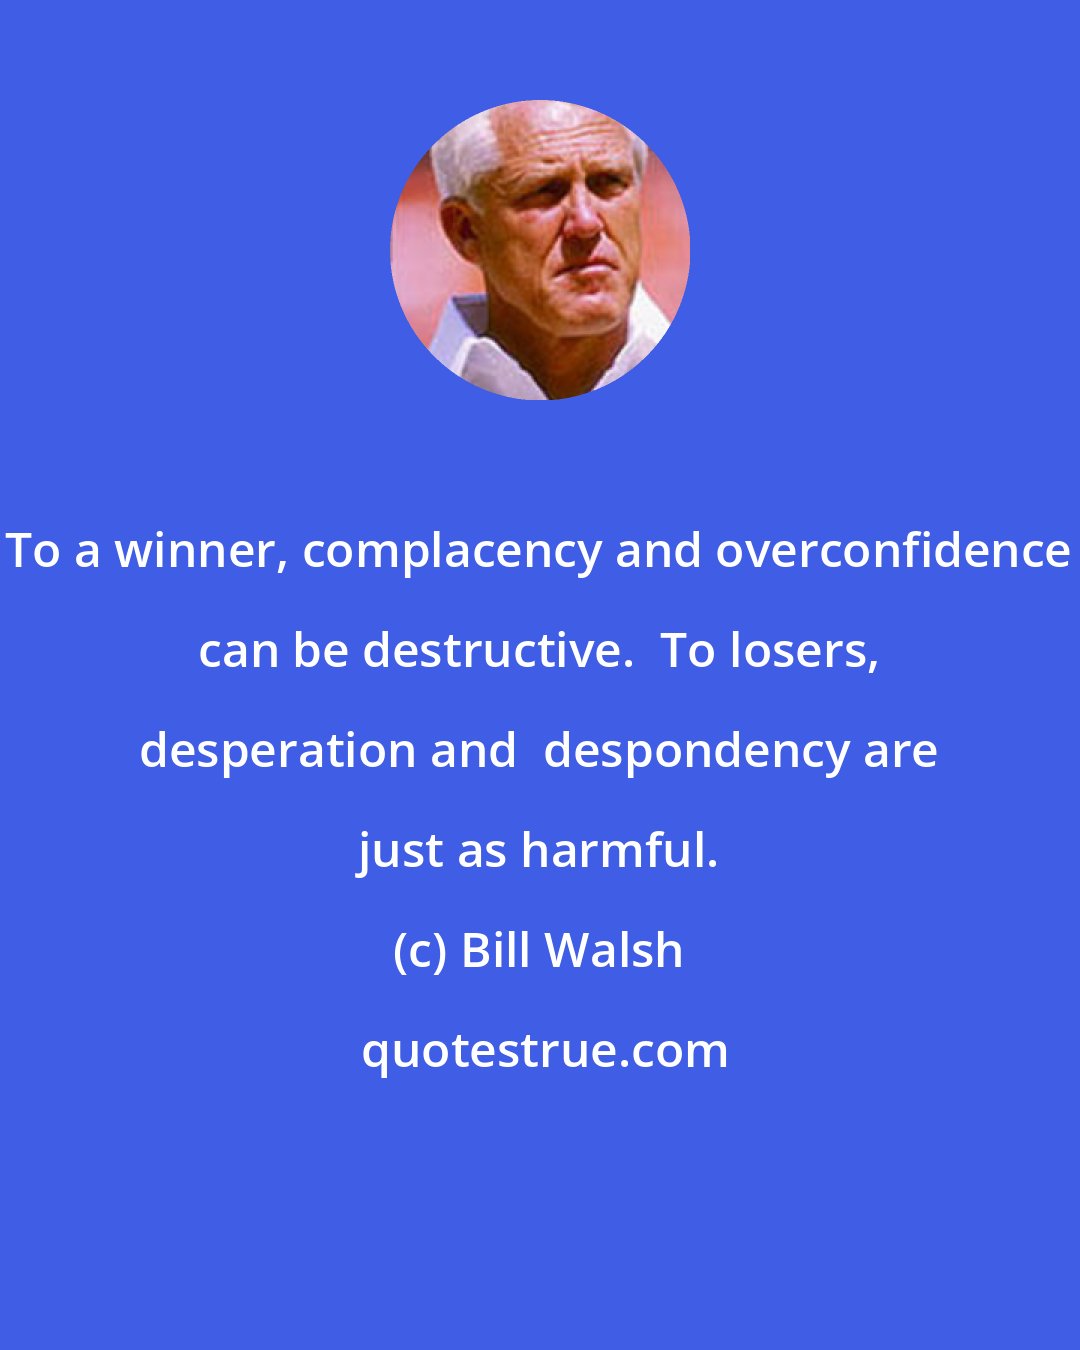 Bill Walsh: To a winner, complacency and overconfidence can be destructive.  To losers, desperation and  despondency are just as harmful.